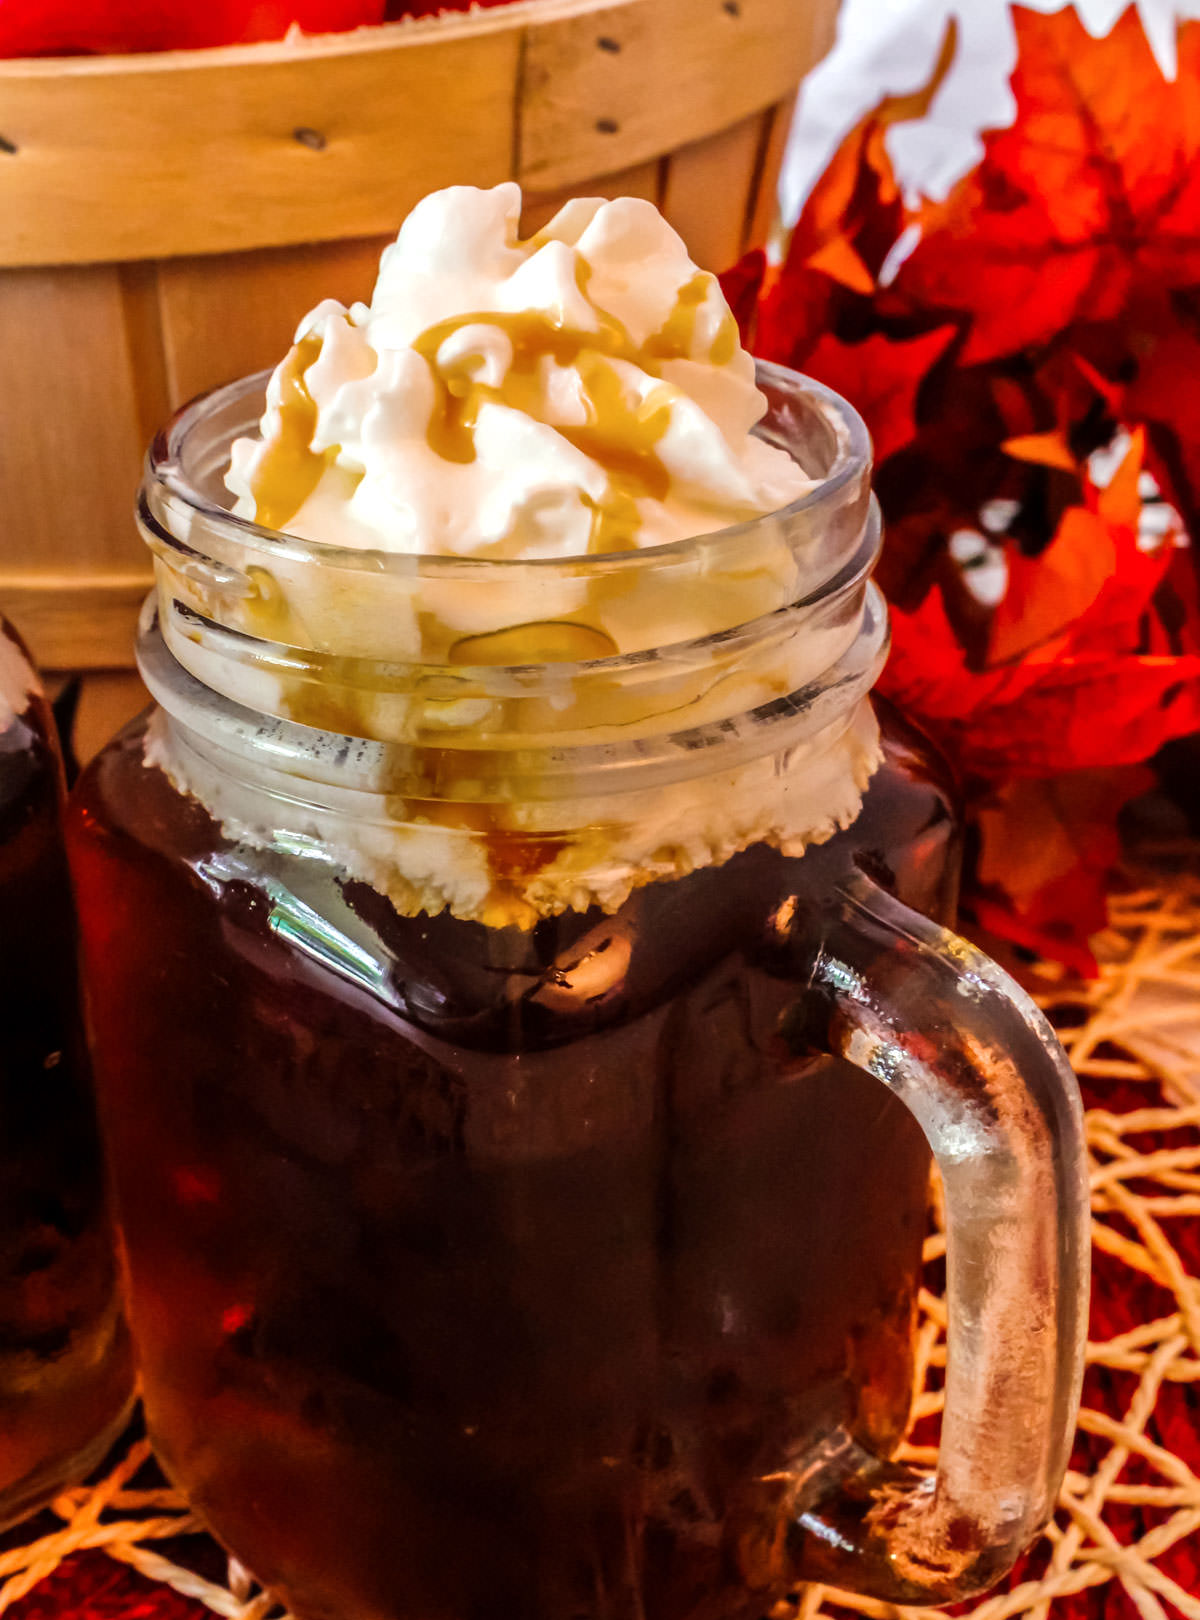 Closeup on a glass mug filled with Caramel Apple Cider topped with Whipped Cream and Caramel sauce.